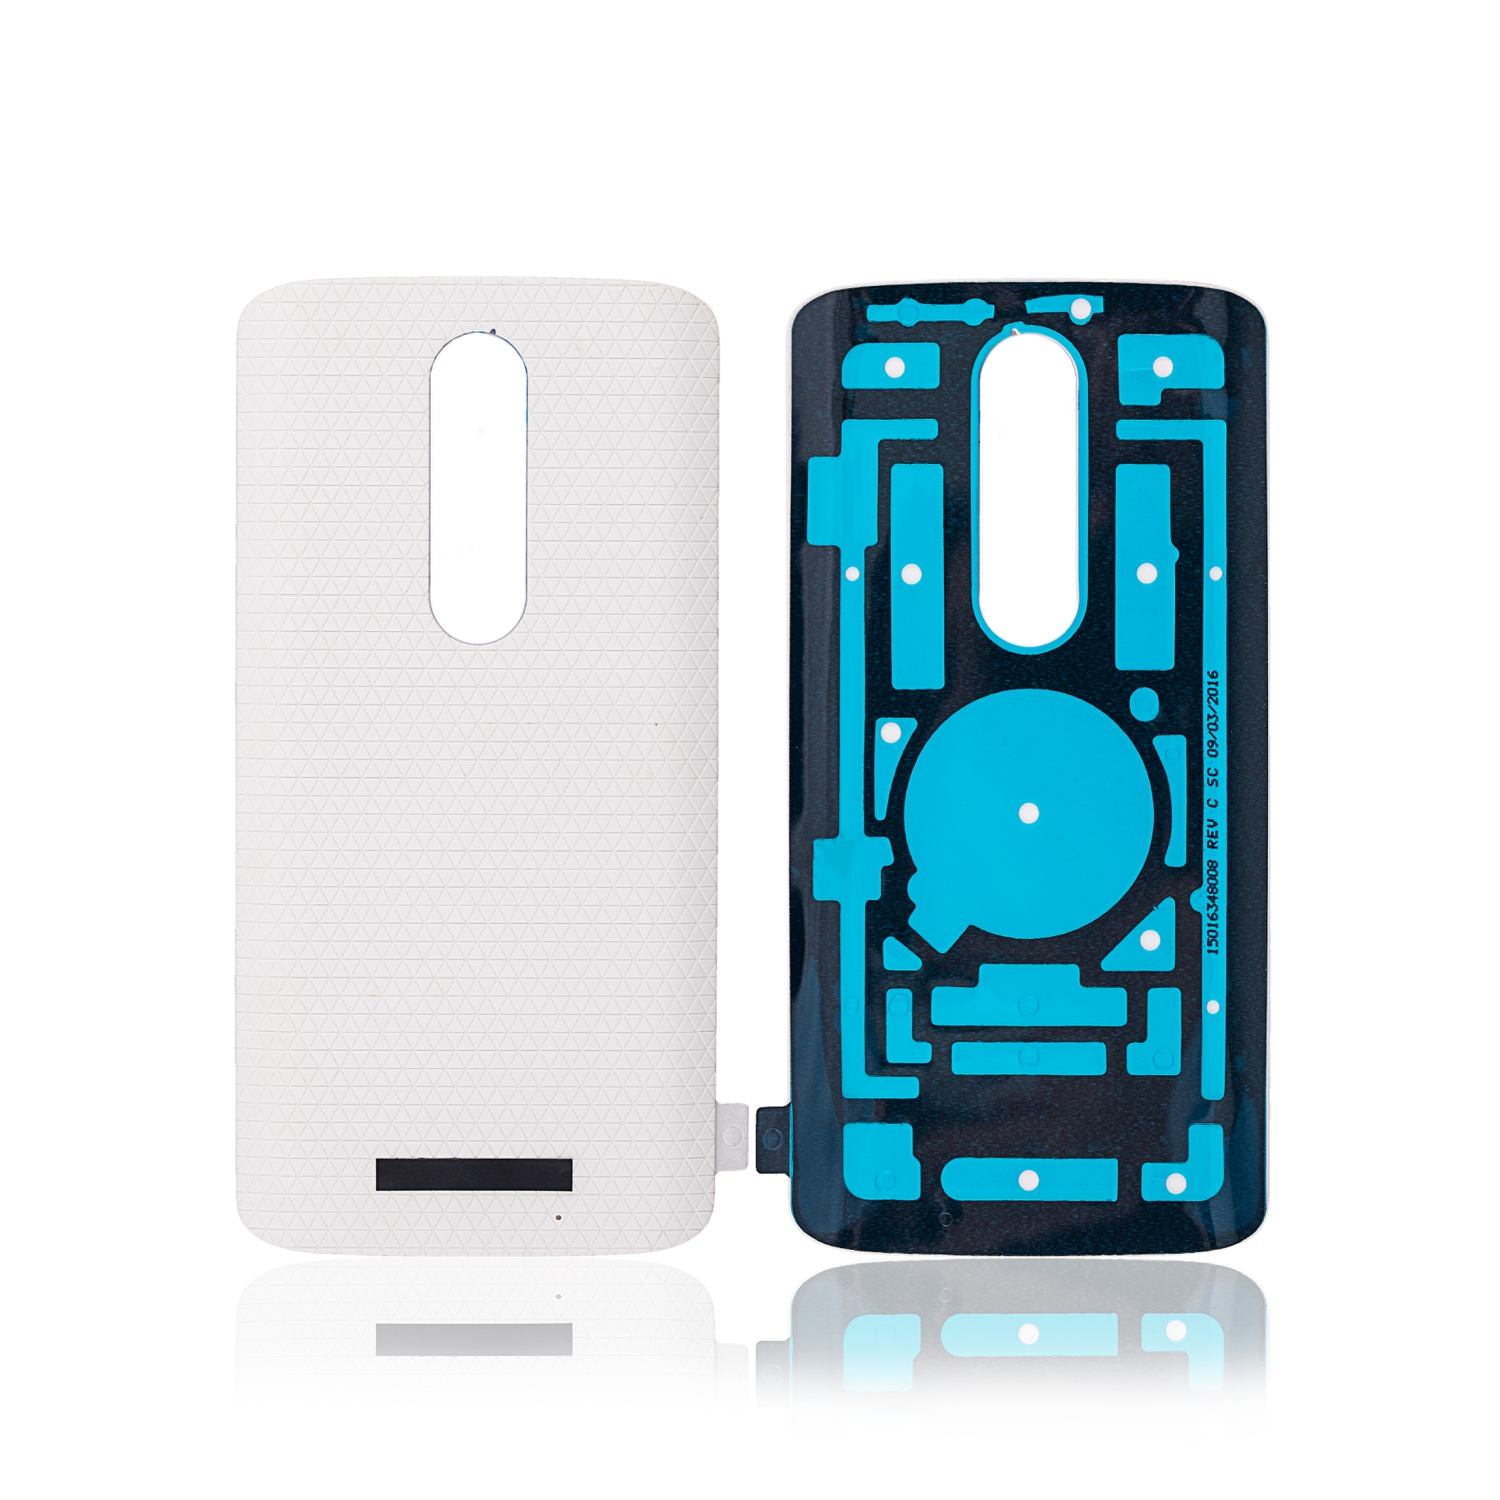 Replacement Back Cover Compatible For Motorola Droid Turbo 2 (XT1585 / XT1580 / XT1581 / 2015) (White)